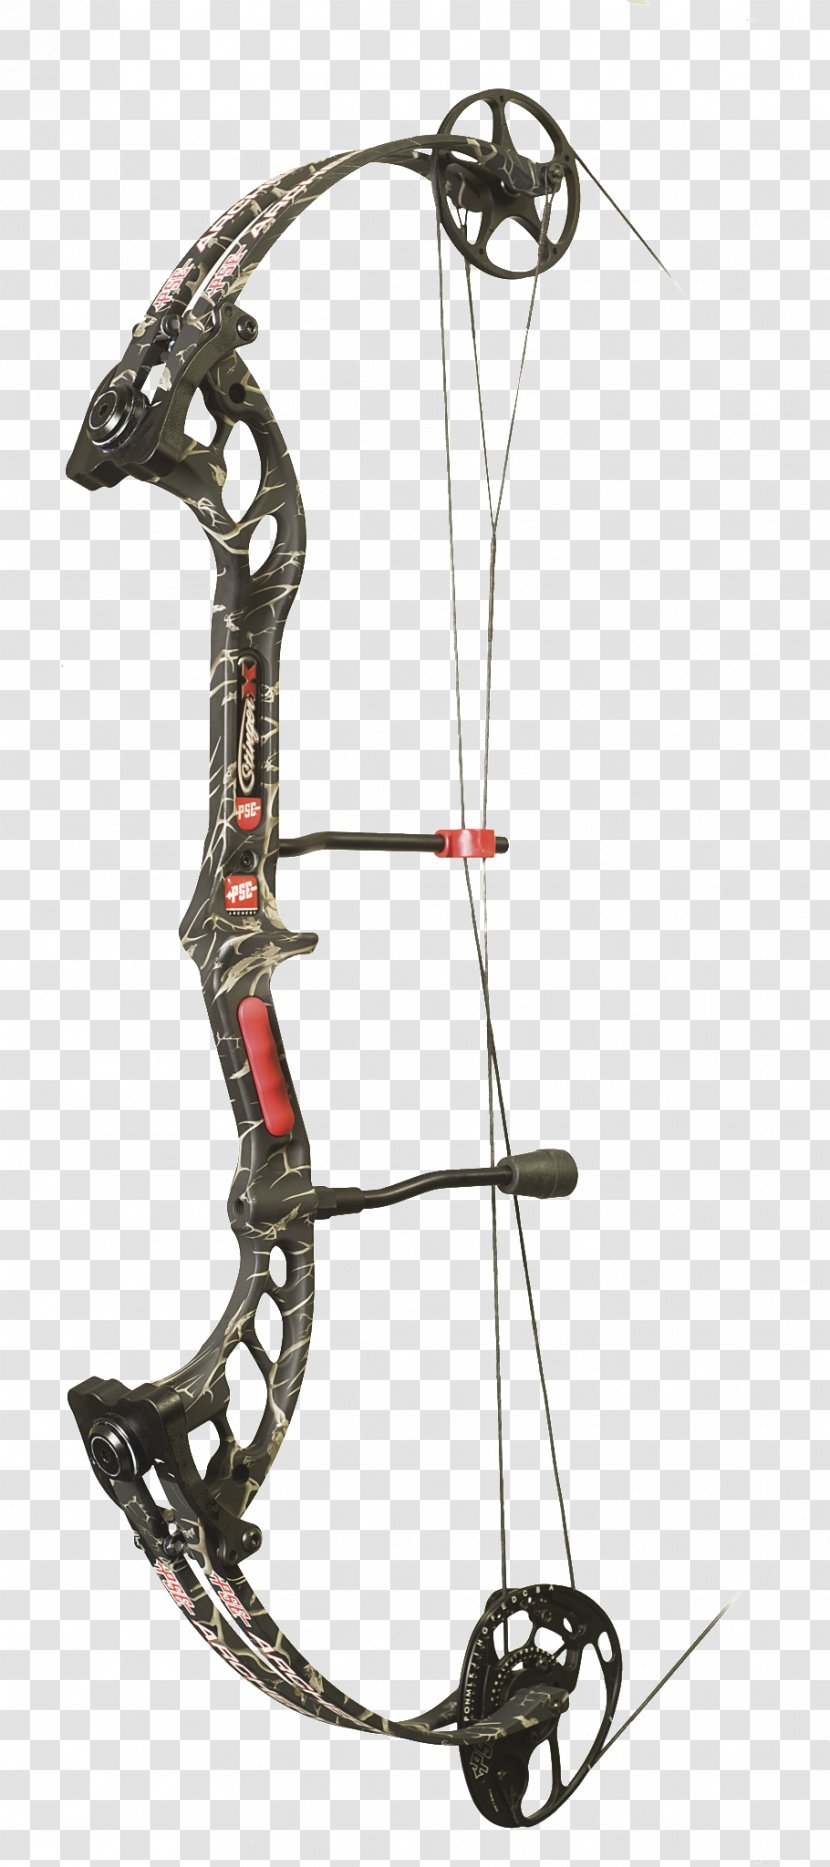 PSE Archery Compound Bows Hunting Bow And Arrow Transparent PNG